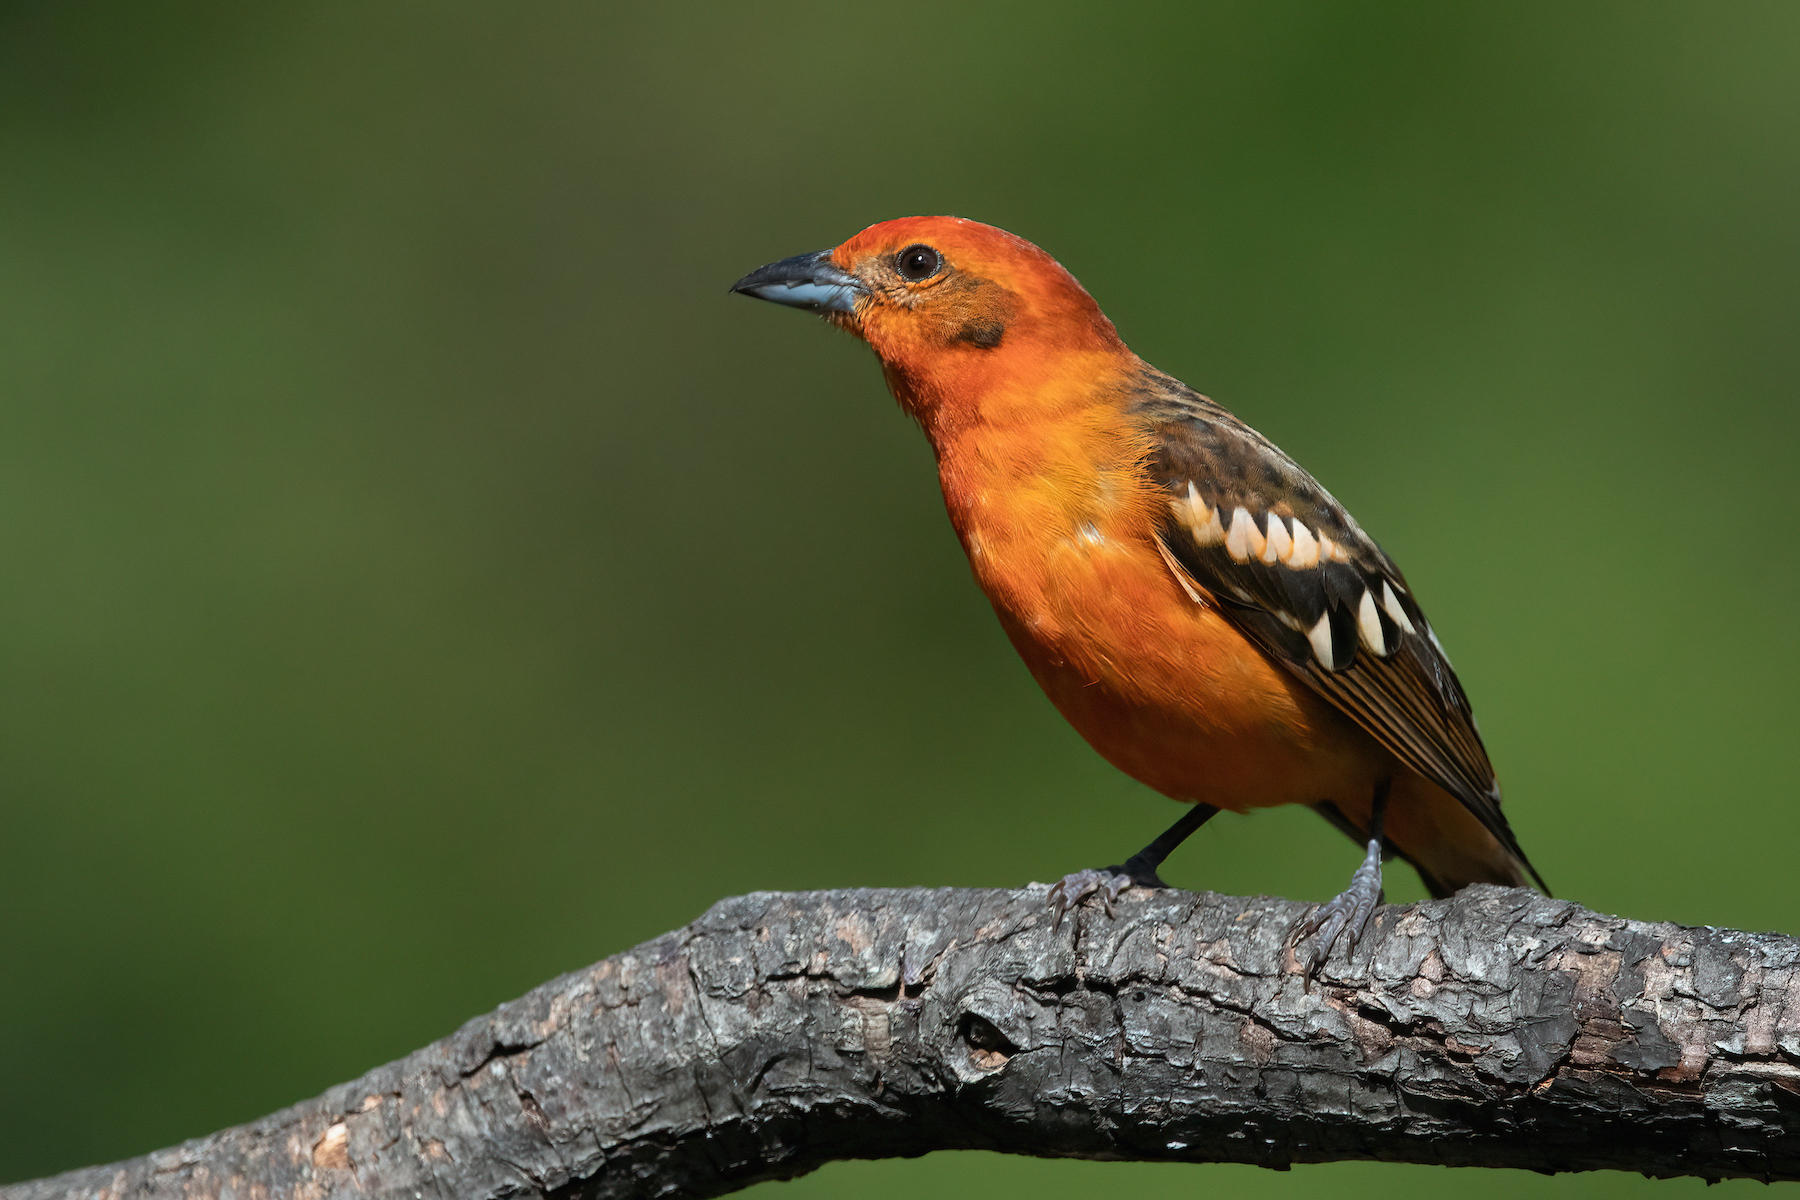 Another stunning bired, the Flame-coloured Tanager